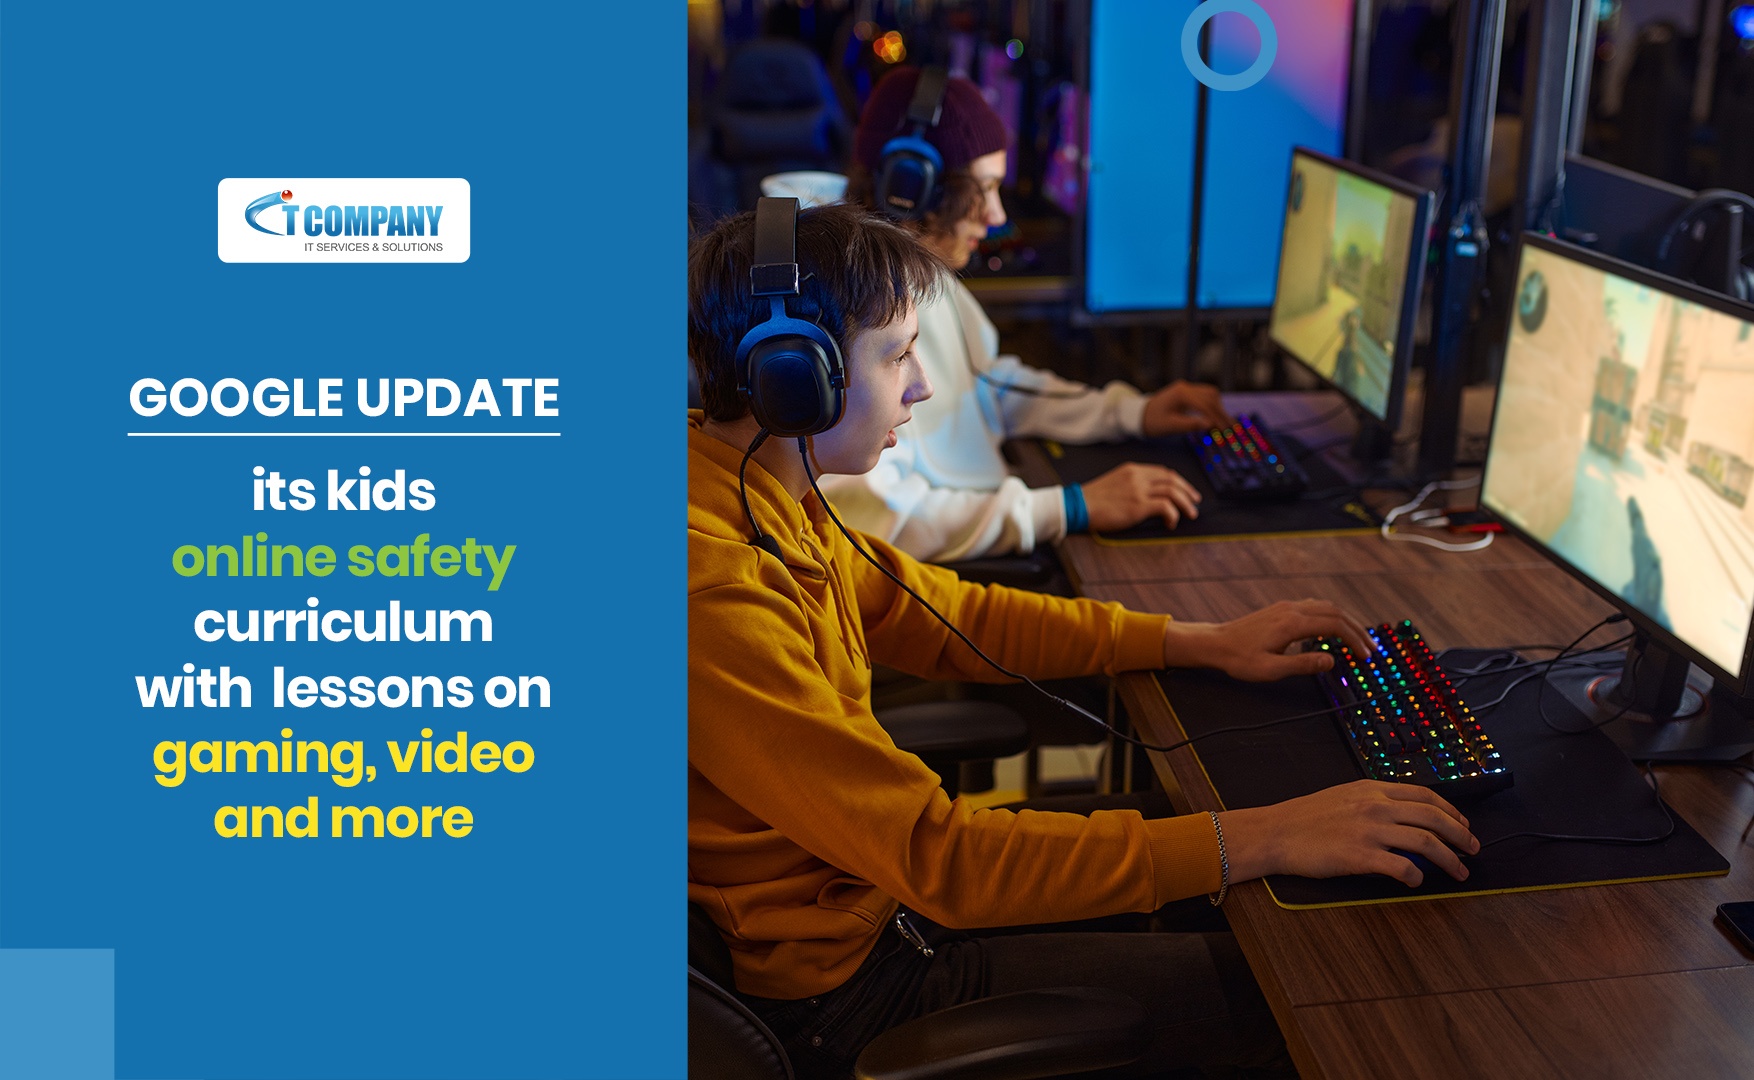 Google has updated its online safety curriculum for youngsters with new lectures on gaming, video, and other topics